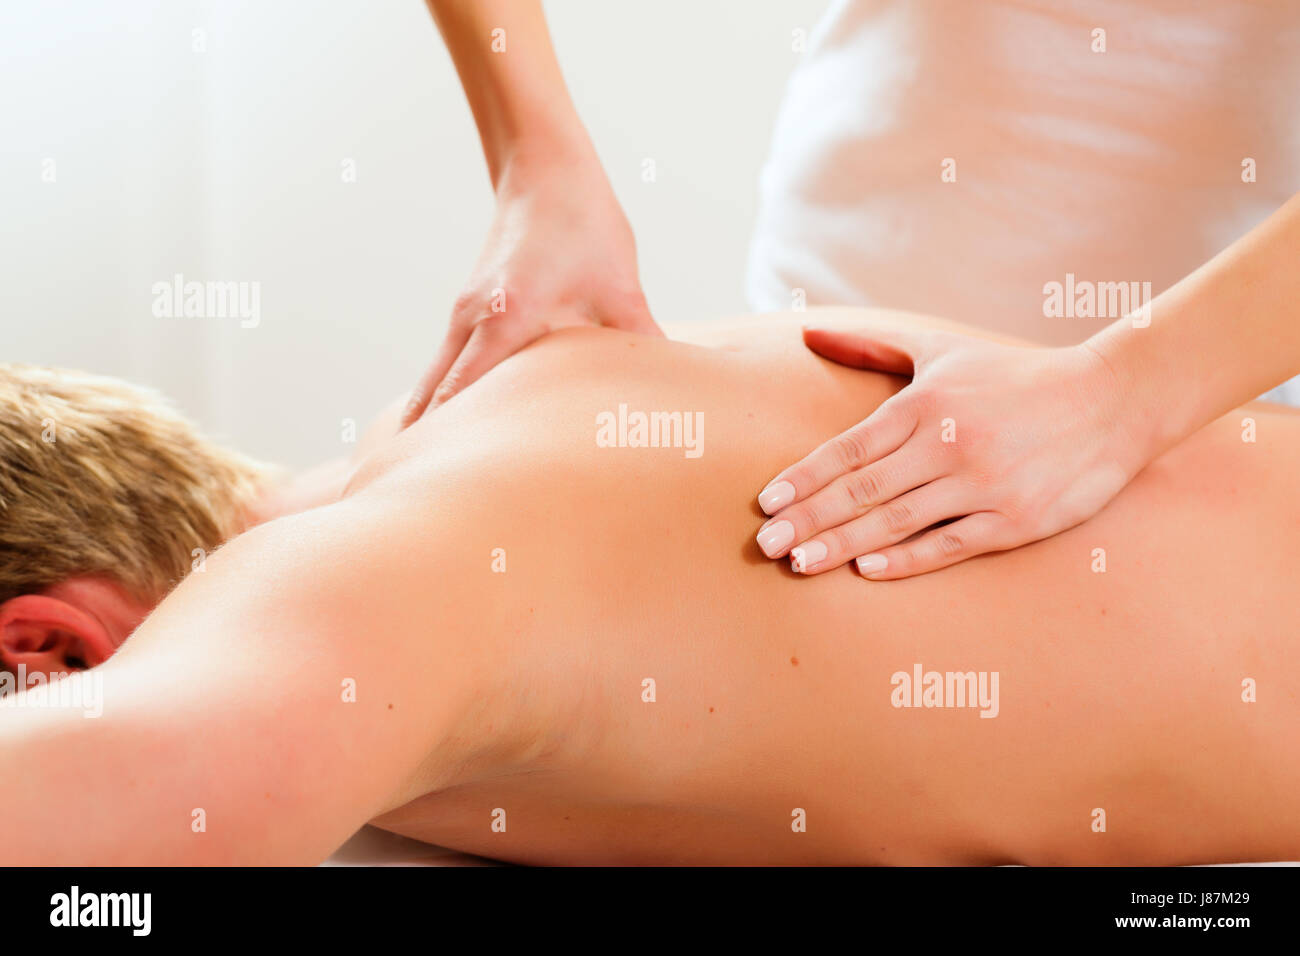 massage, physiotherapy, therapist, spa, wellness, doctor, physician, medic, Stock Photo